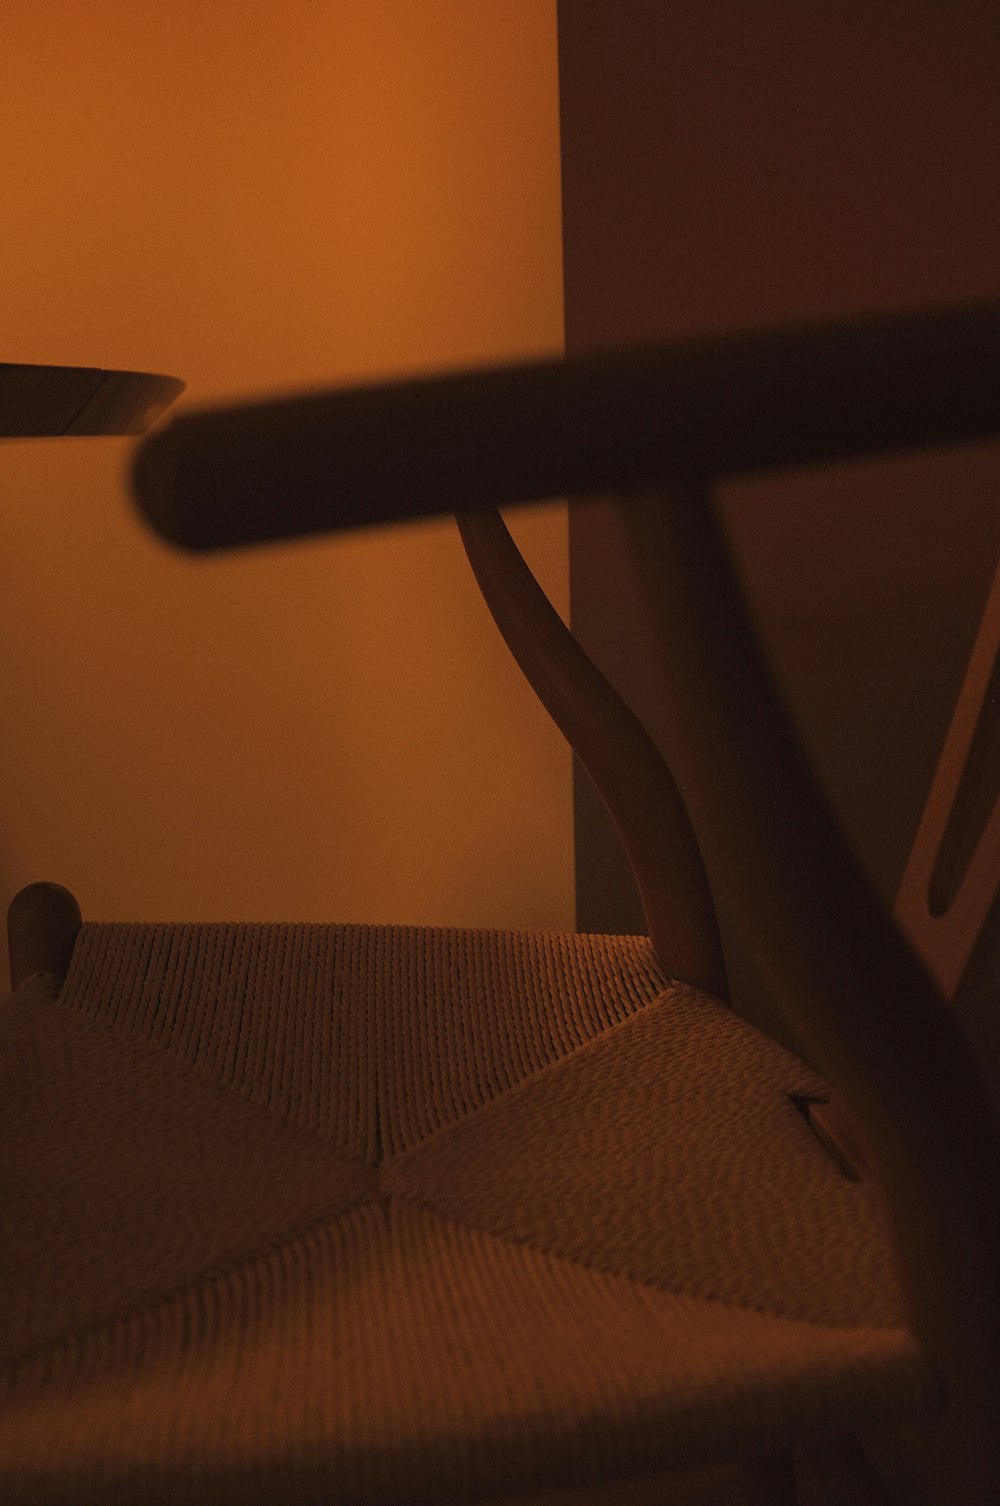 a close up of a chair with a table in the background